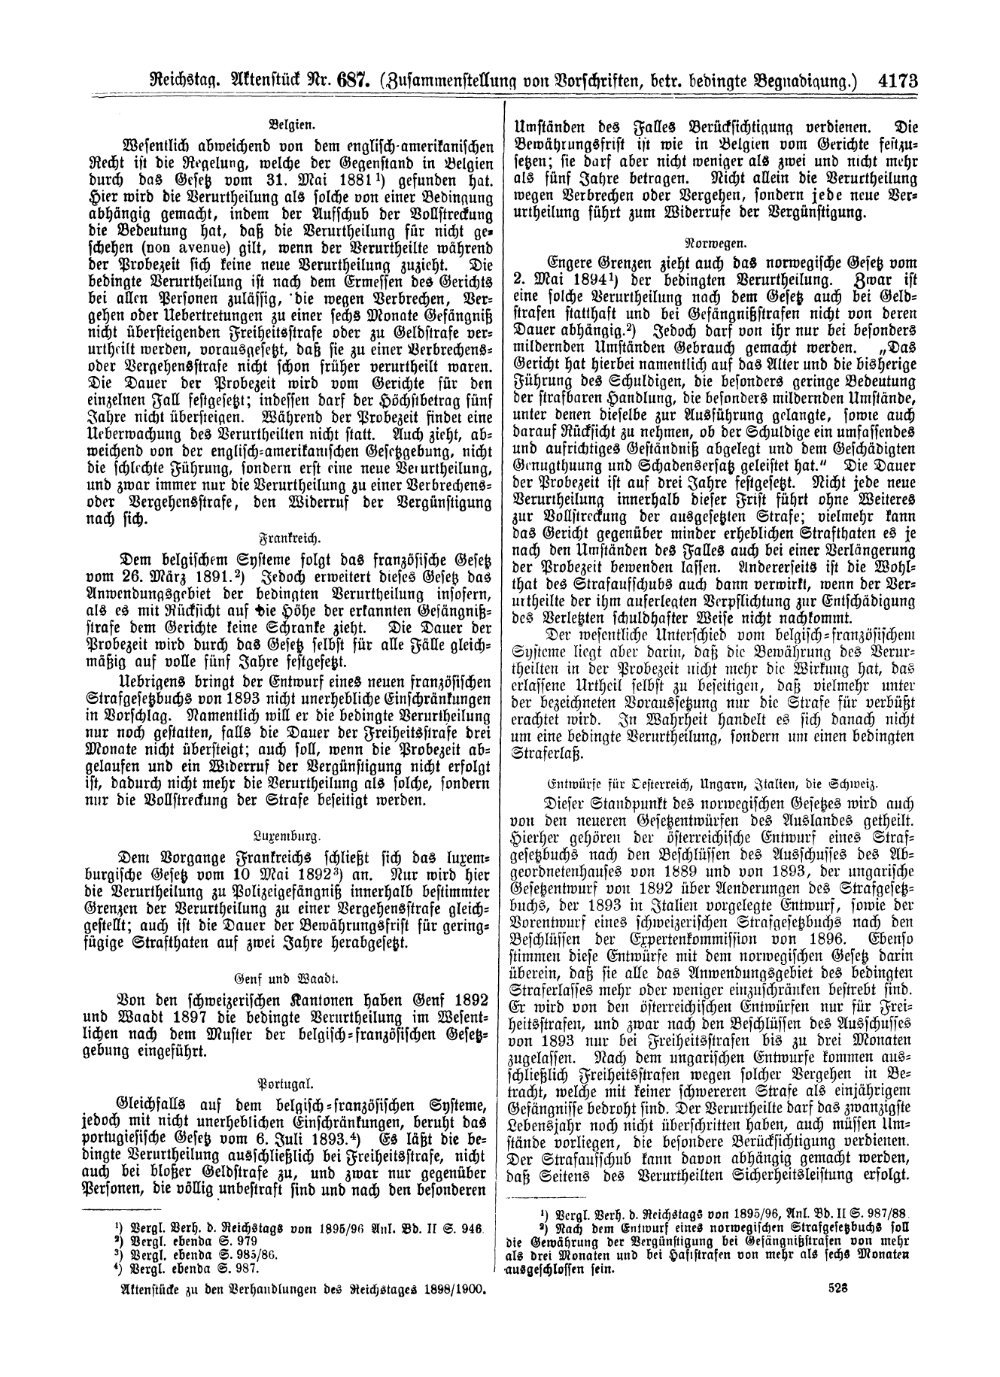 Scan of page 4173